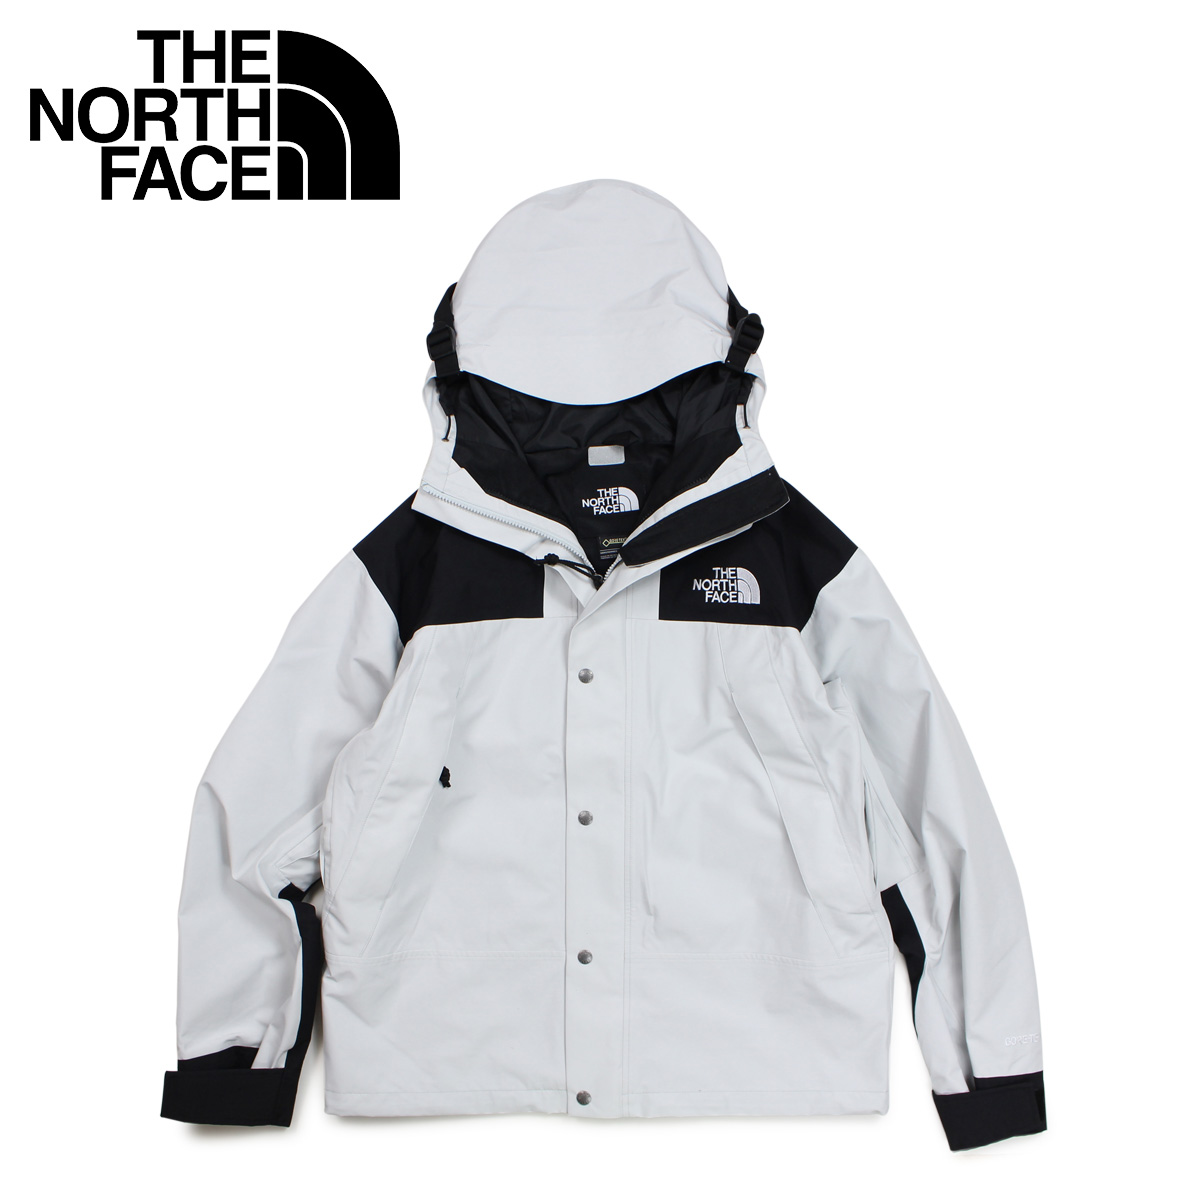 grey and white north face jacket